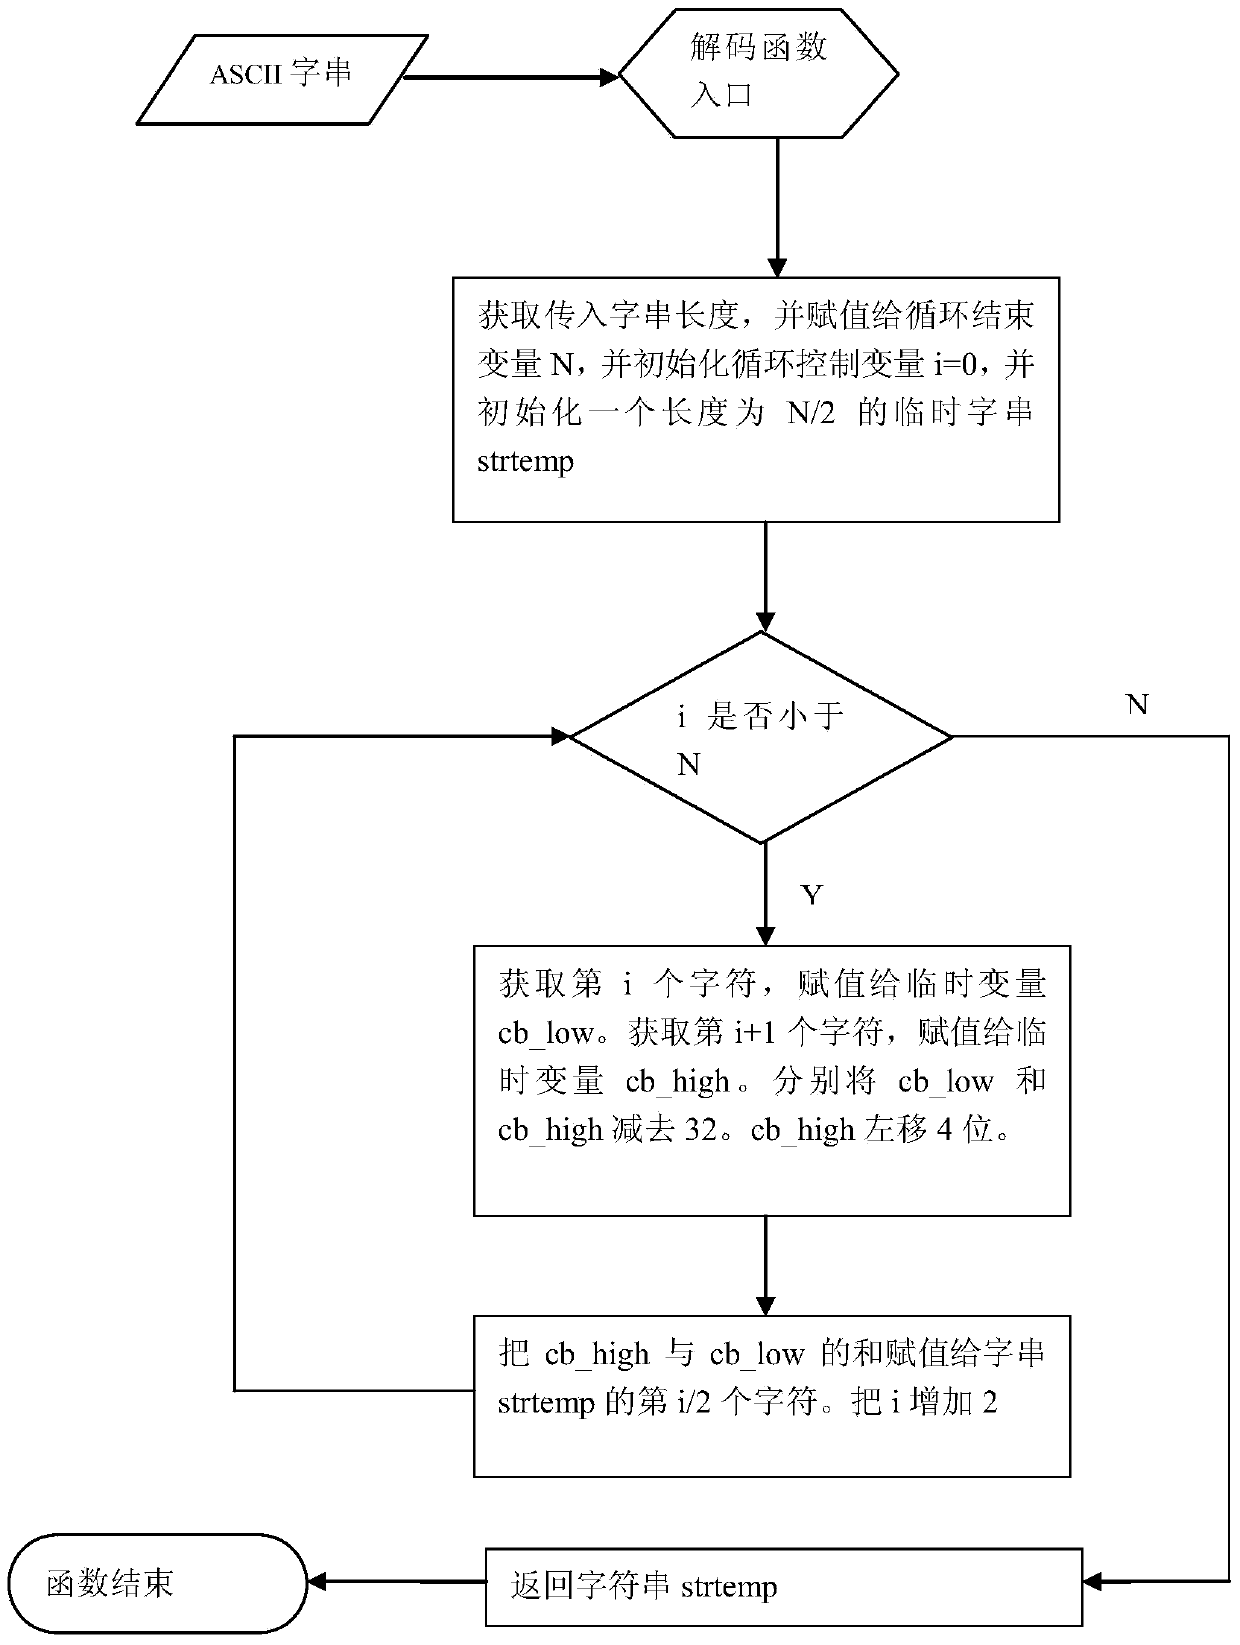 Chinese character coding and decoding method based on transmission of keyboard input interface